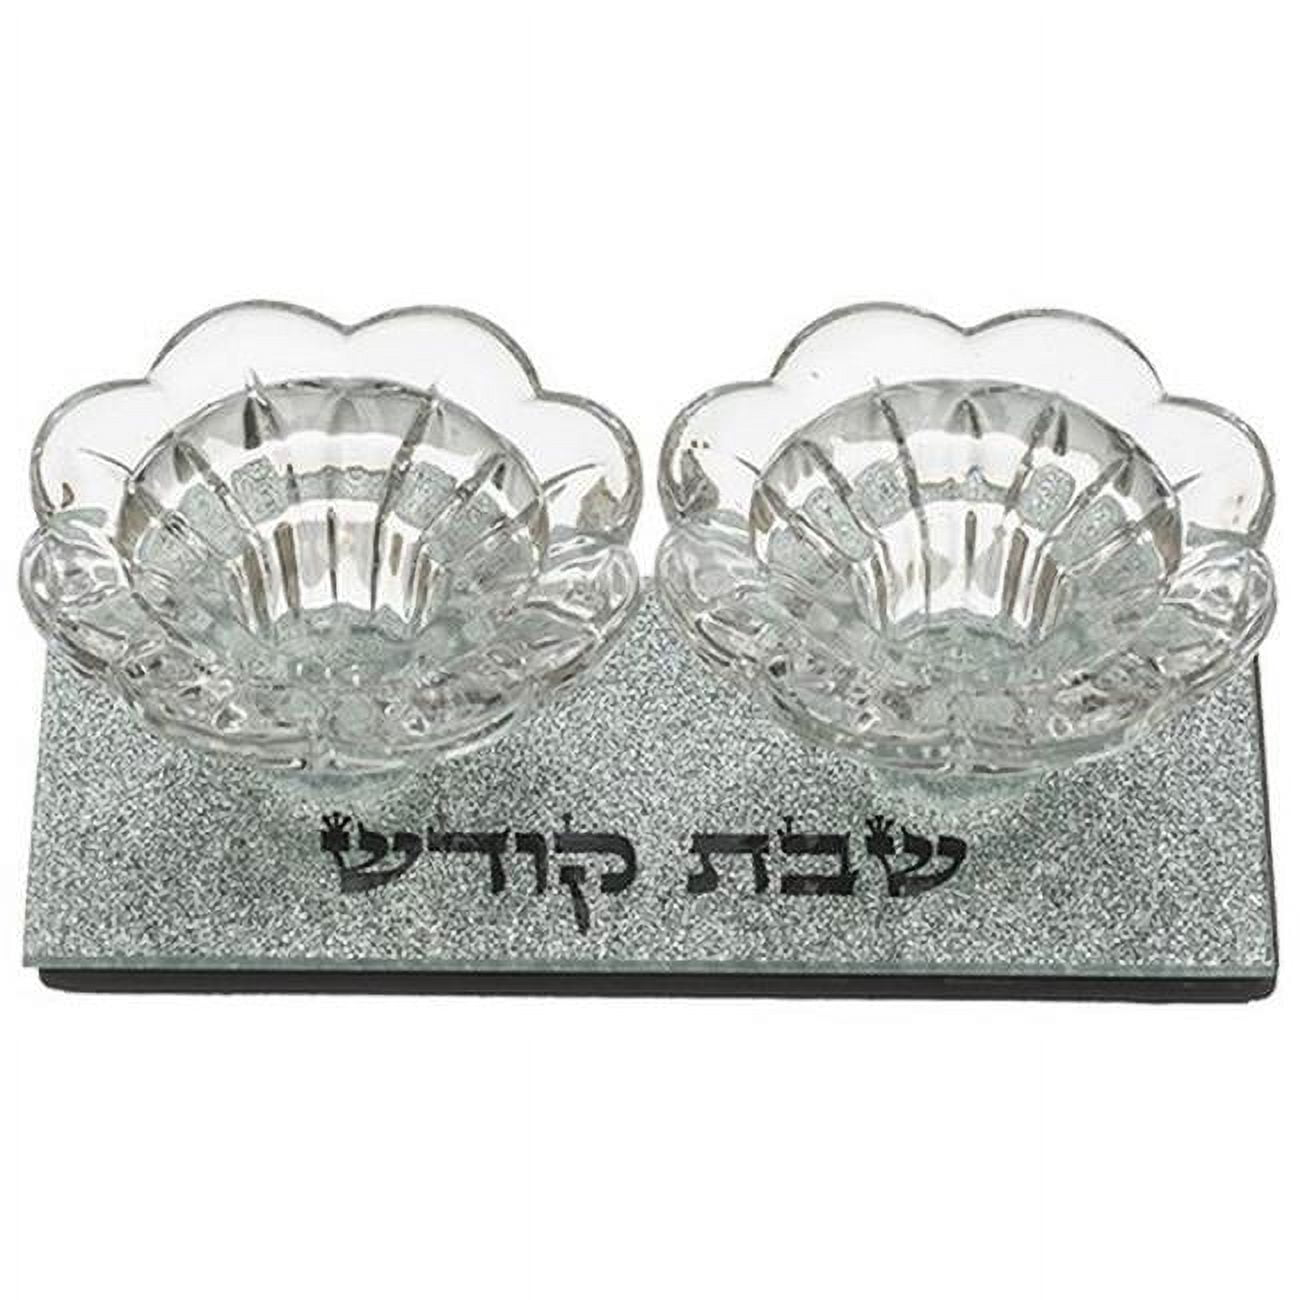 Picture of Art Judaica 47918 1.5 x 5.5 x 2 in. Glass Candlestick with Glitter